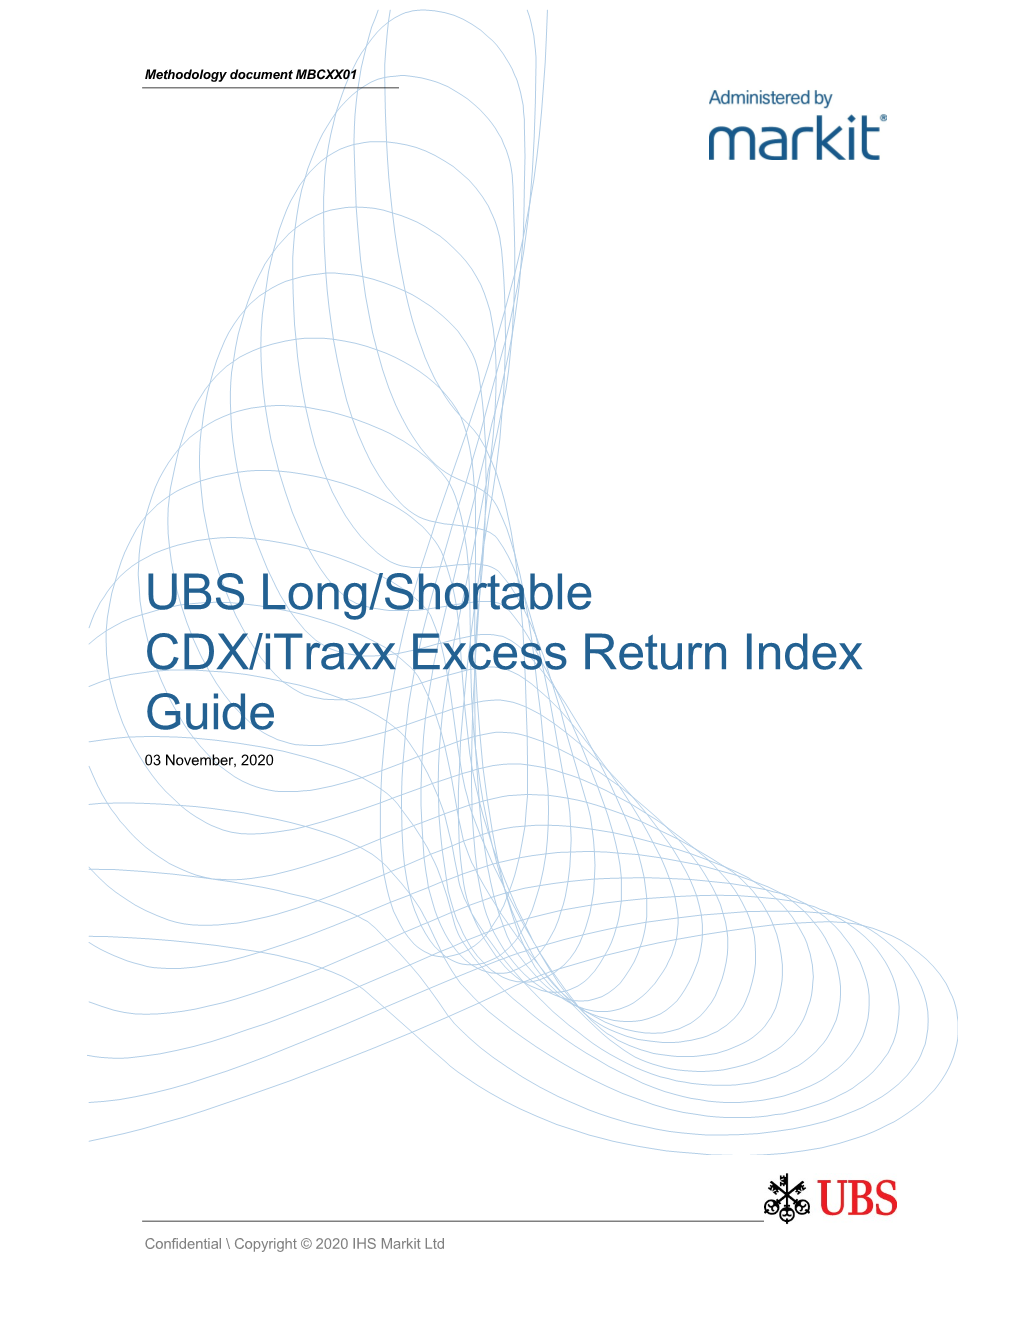 UBS Long/Shortable CDX/Itraxx Excess Return Index Guide